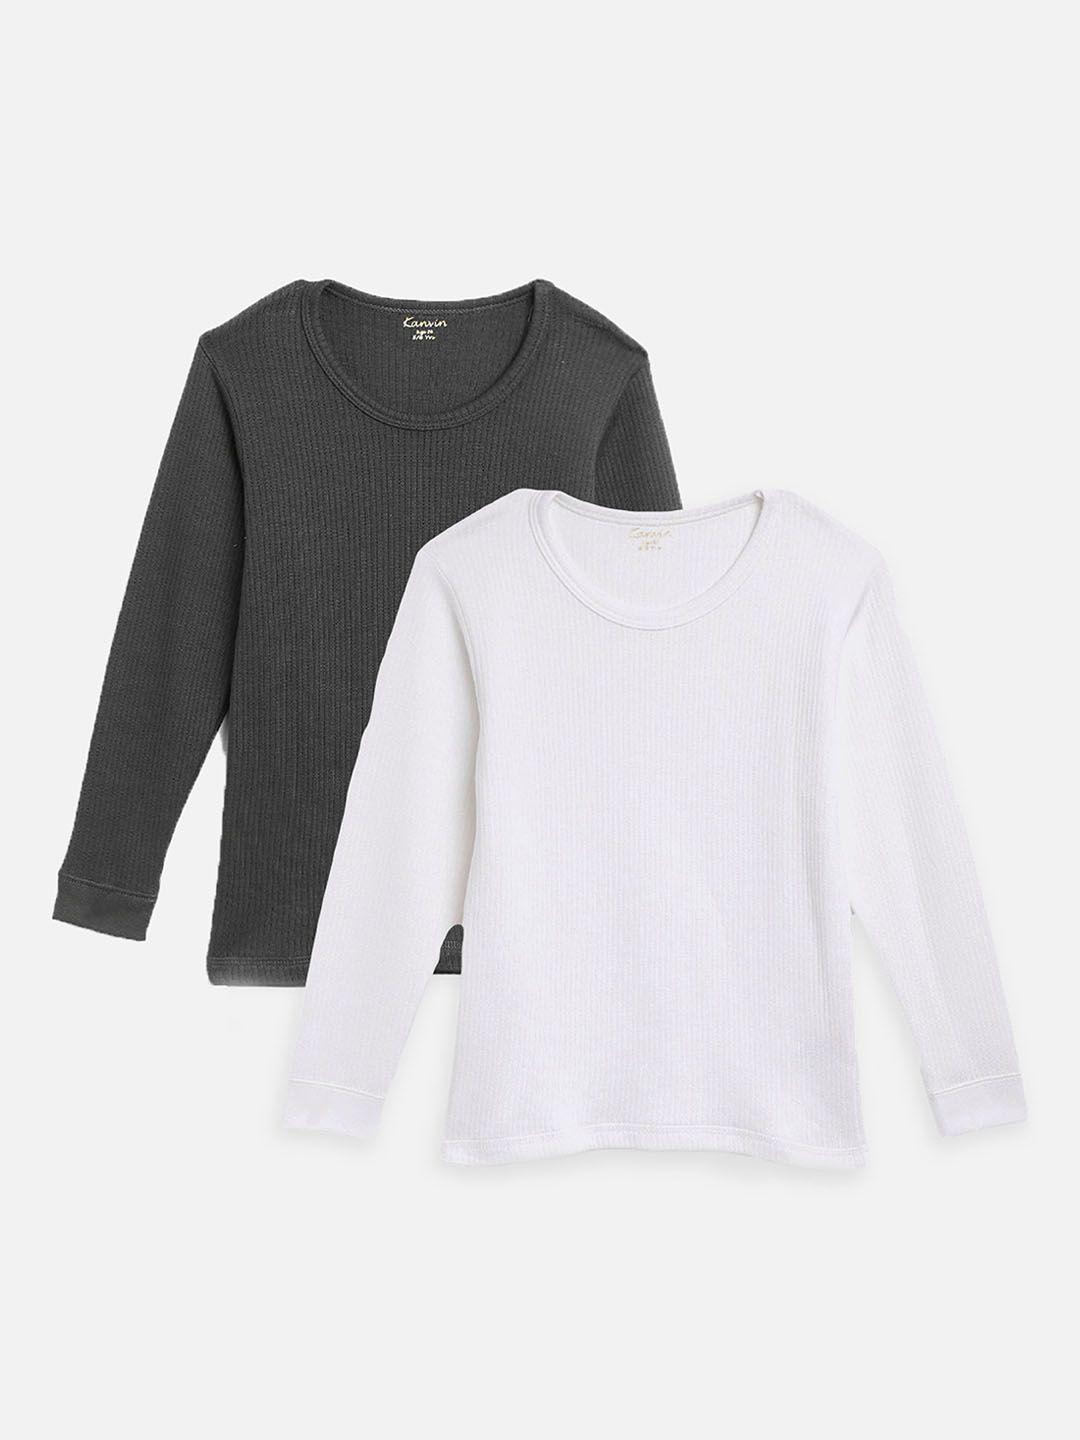 kanvin boys pack of 2 charcoal & white ribbed cotton thermal tops